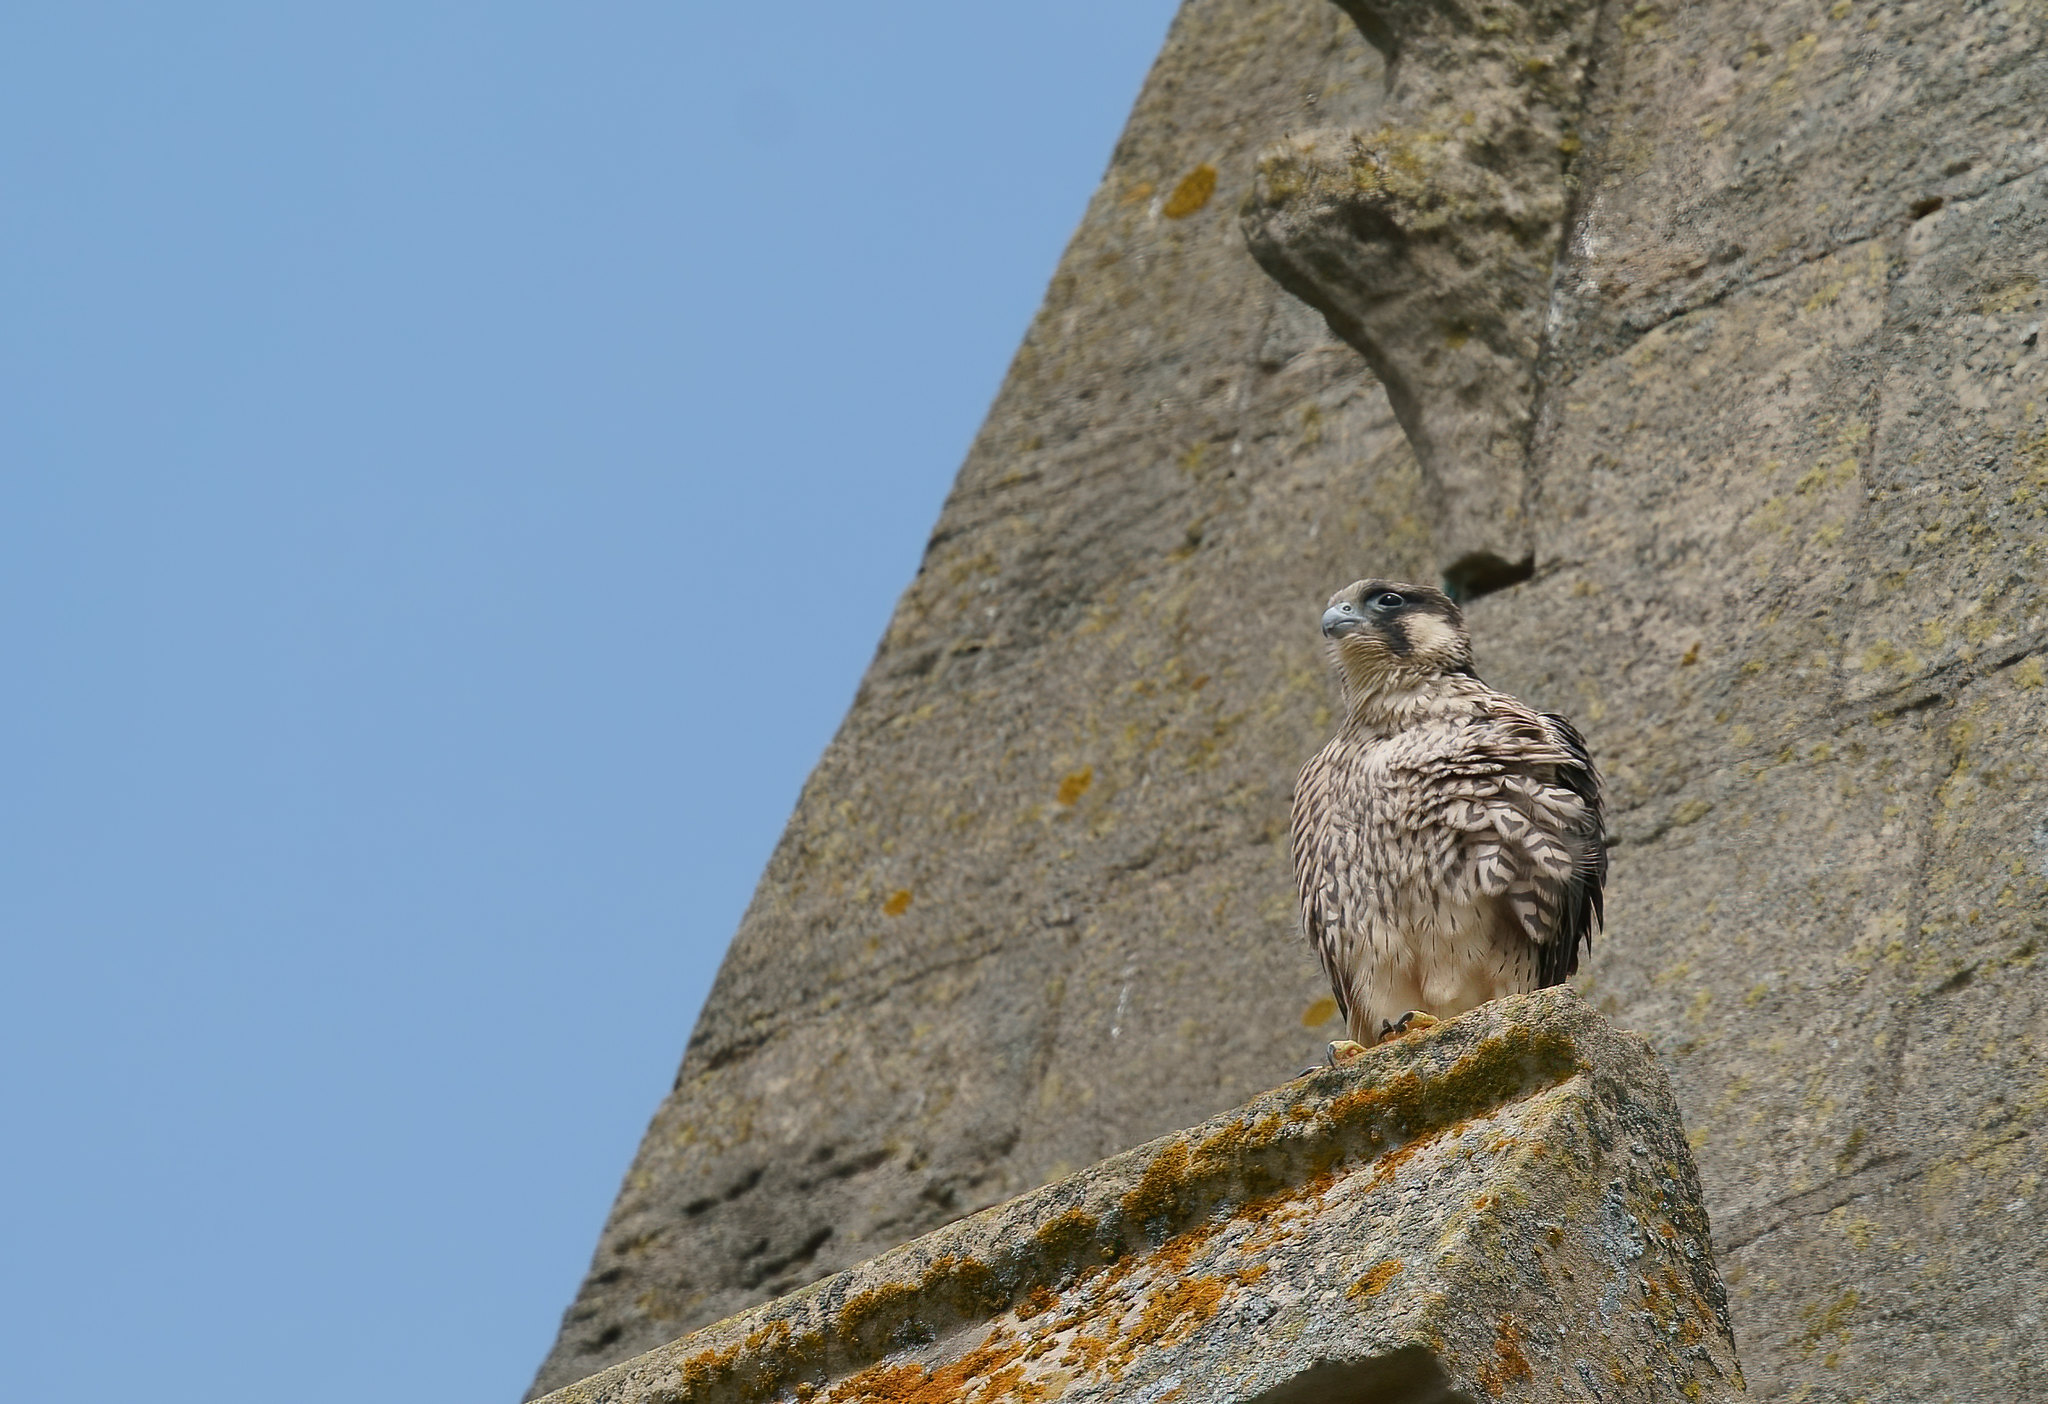 A day with Peregrines